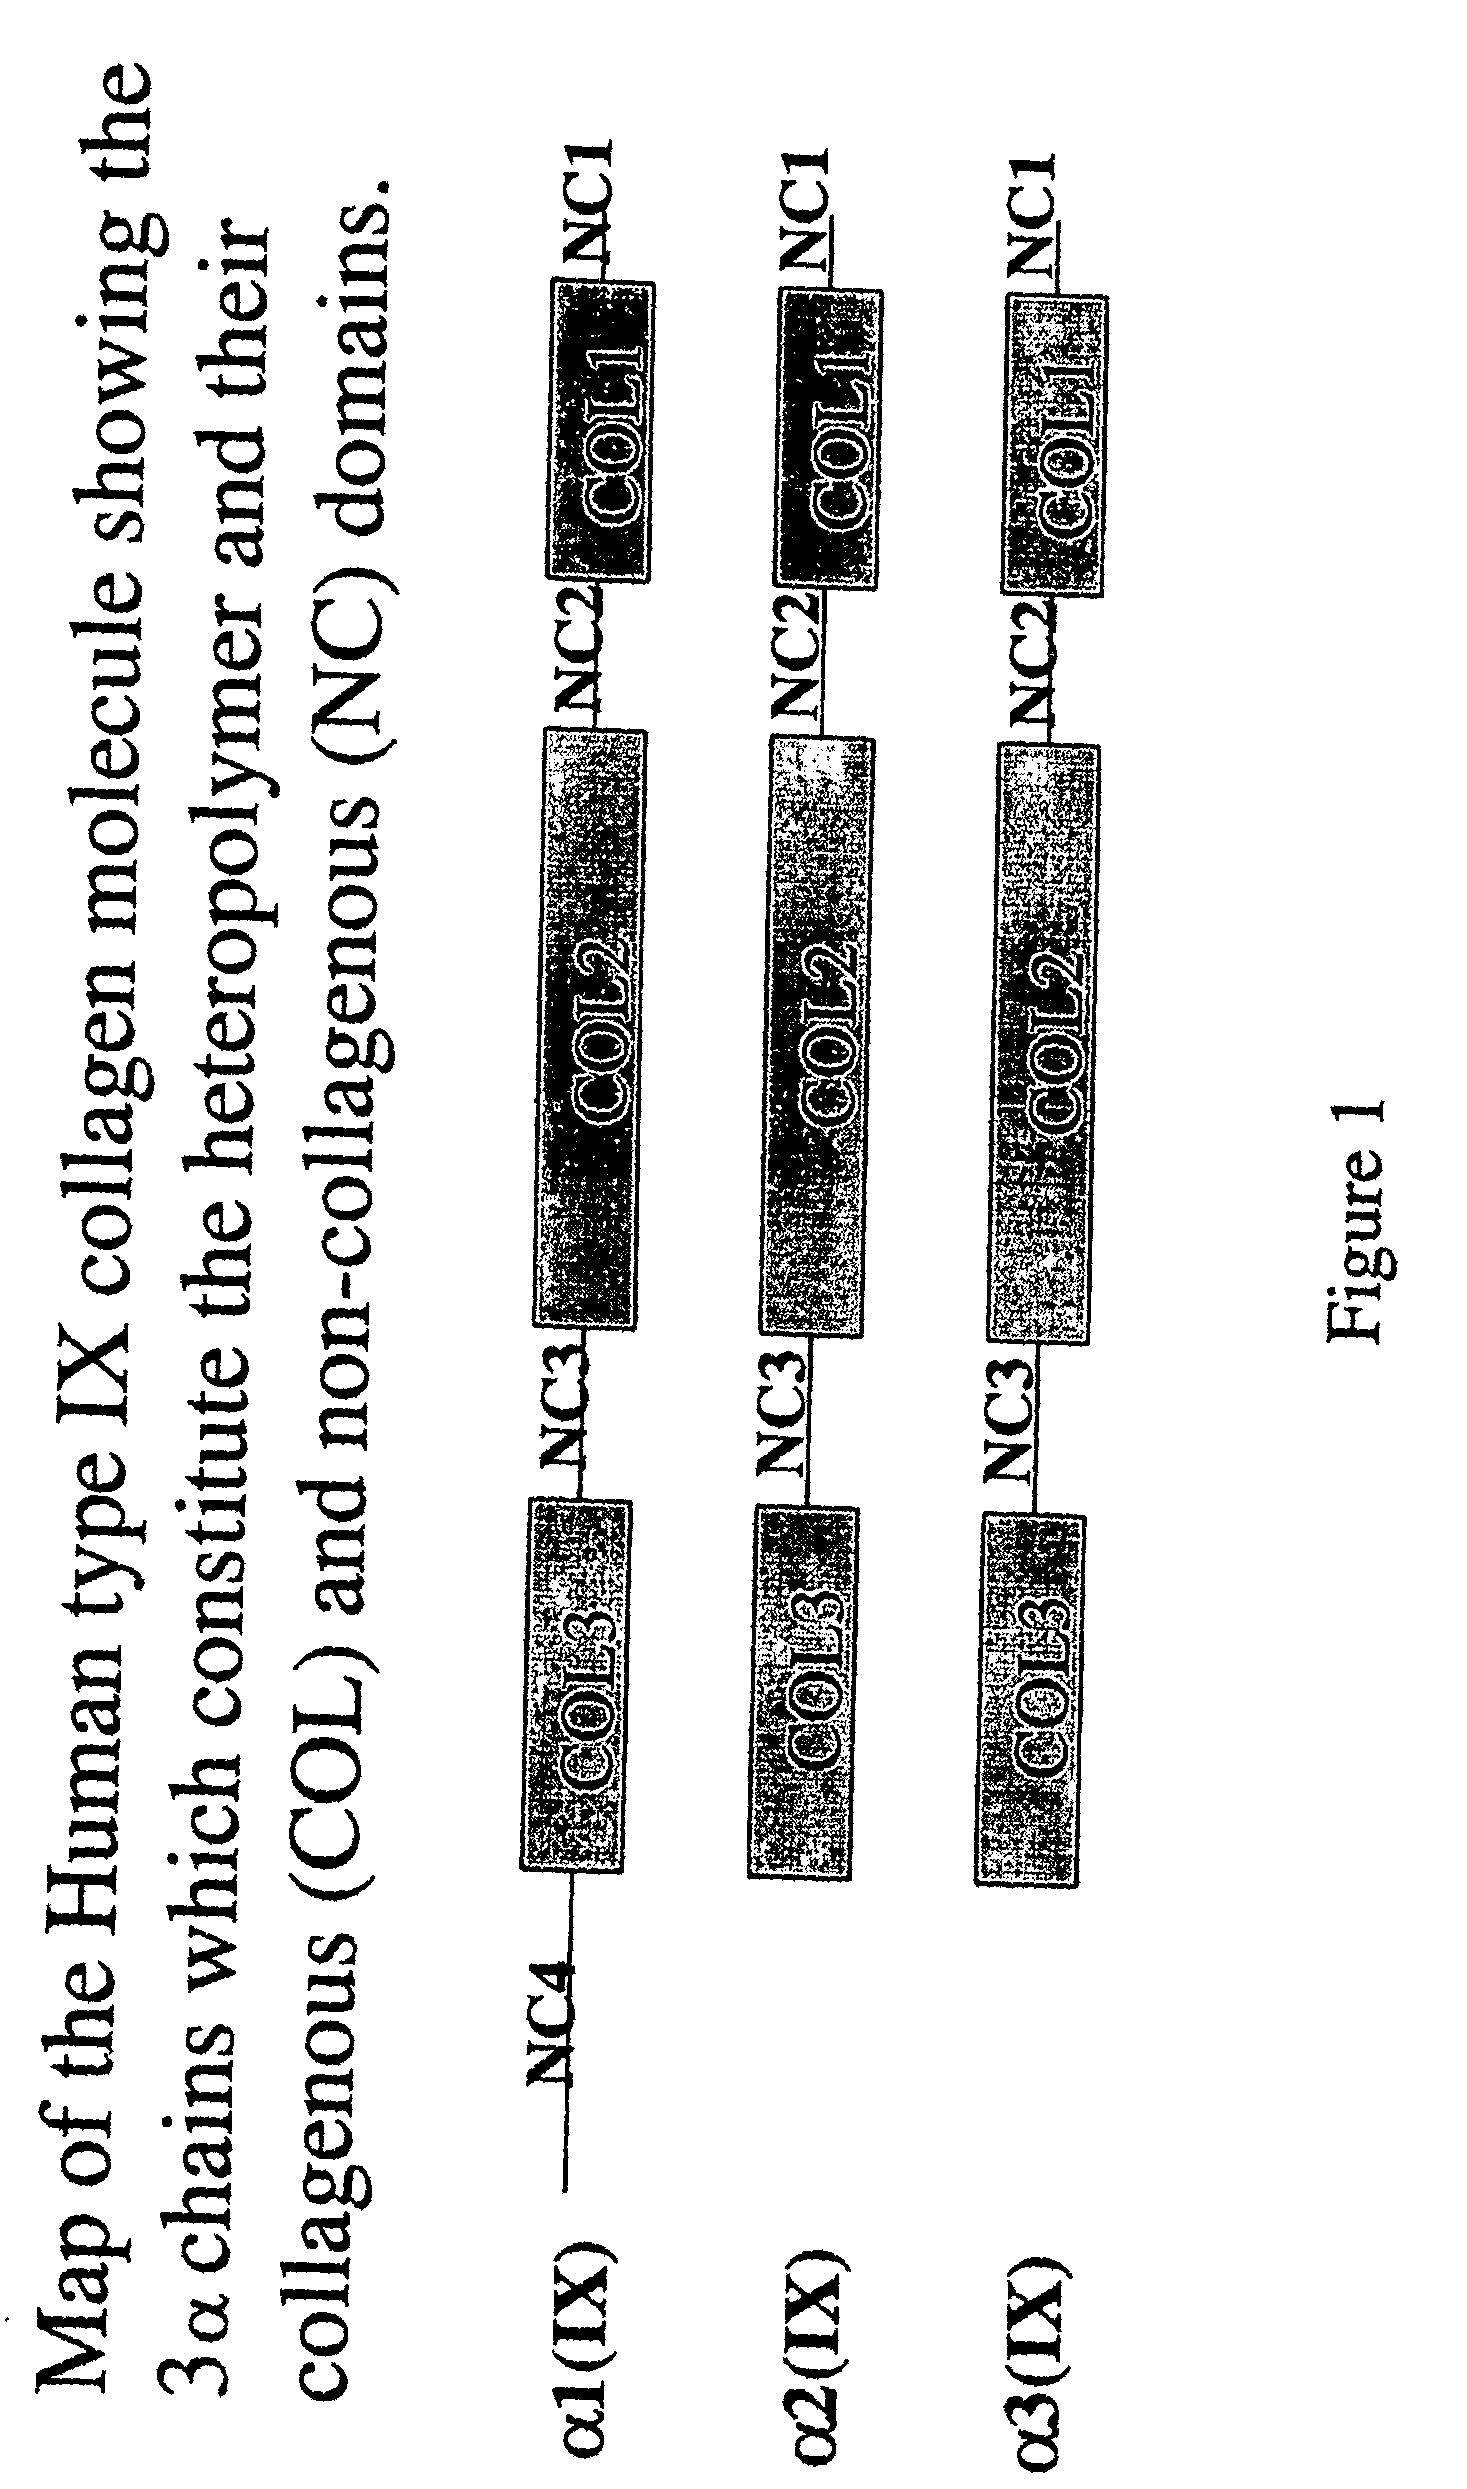 Connective tissue derived polypeptides